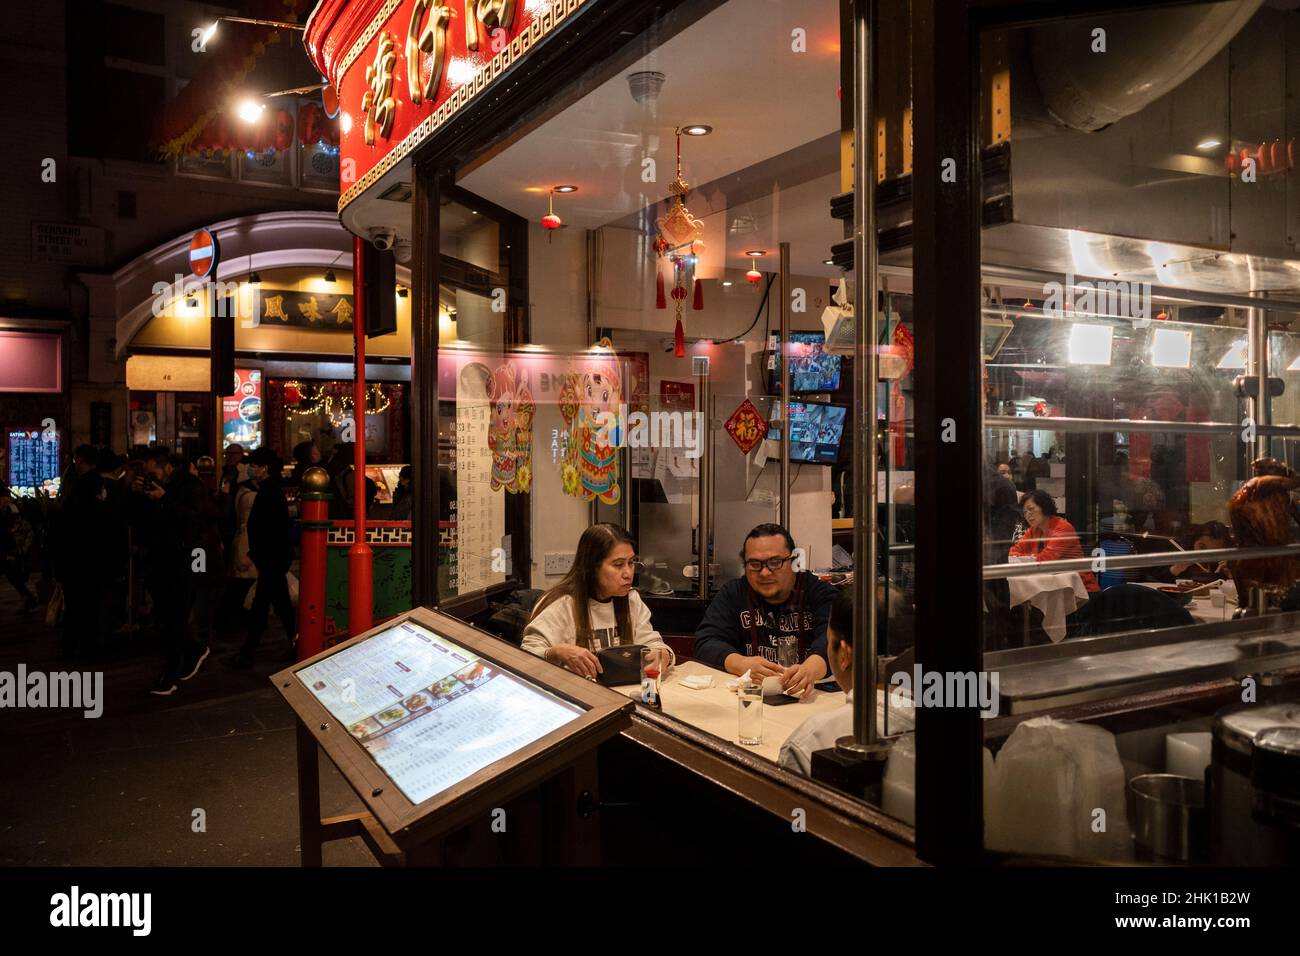 London, UK. 1 February 2022. People dining in the Wanchai Corner restaurant  in Chinatown on the evening of Chinese New Year as The Year of the Tiger  officially begins. Festivities in Chinatown